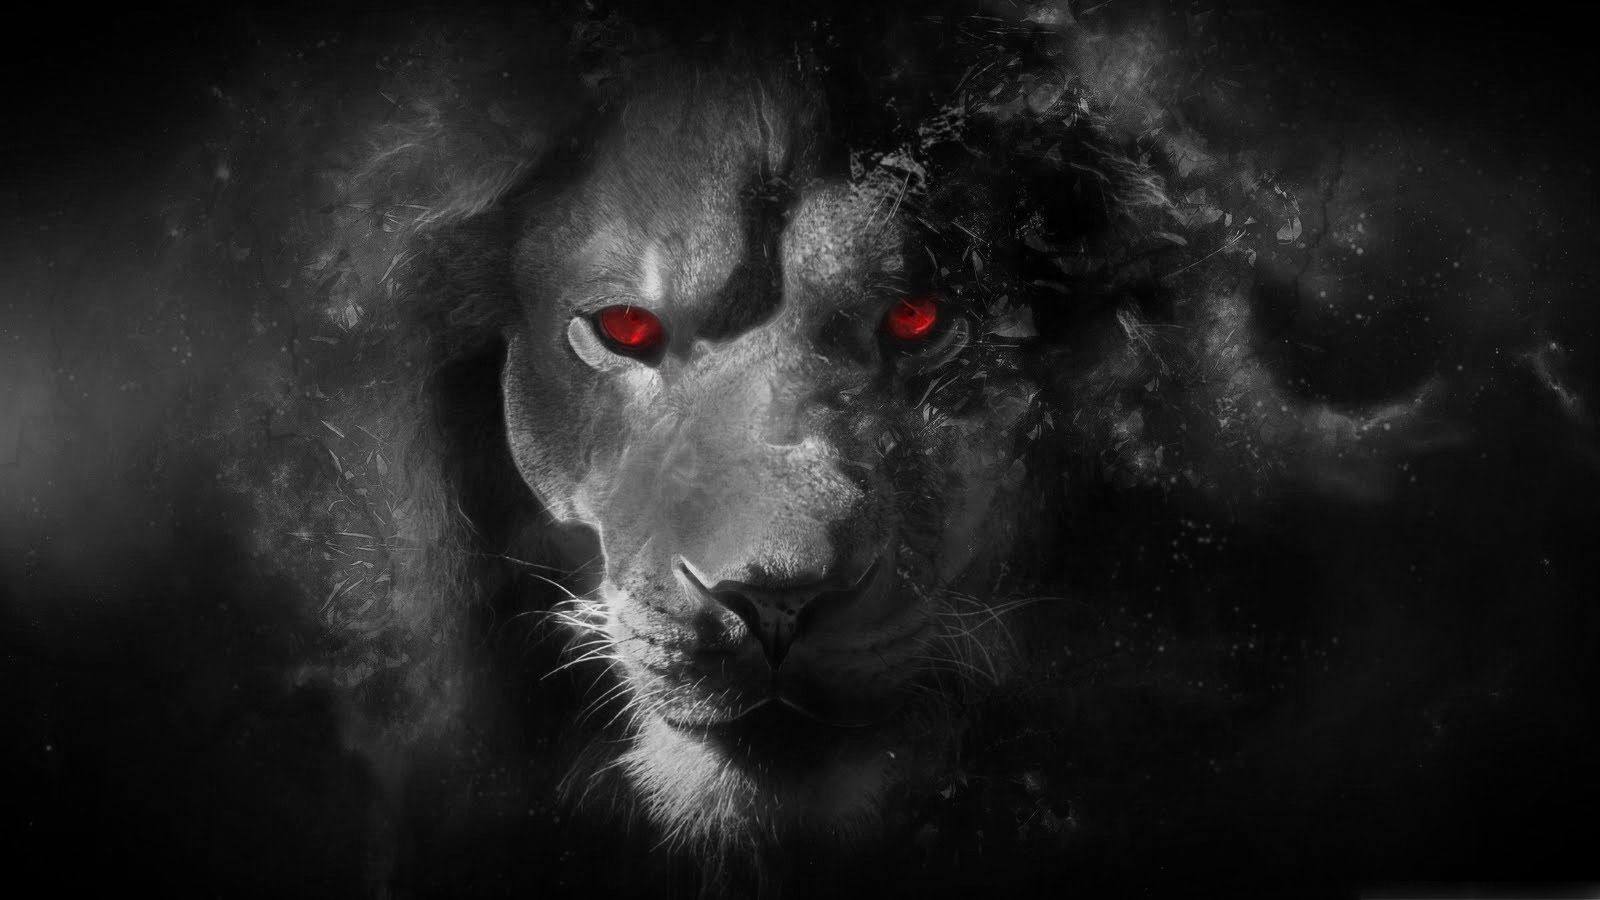 Lion Black and White Backgrounds 2077 - HD Wallpaper Site